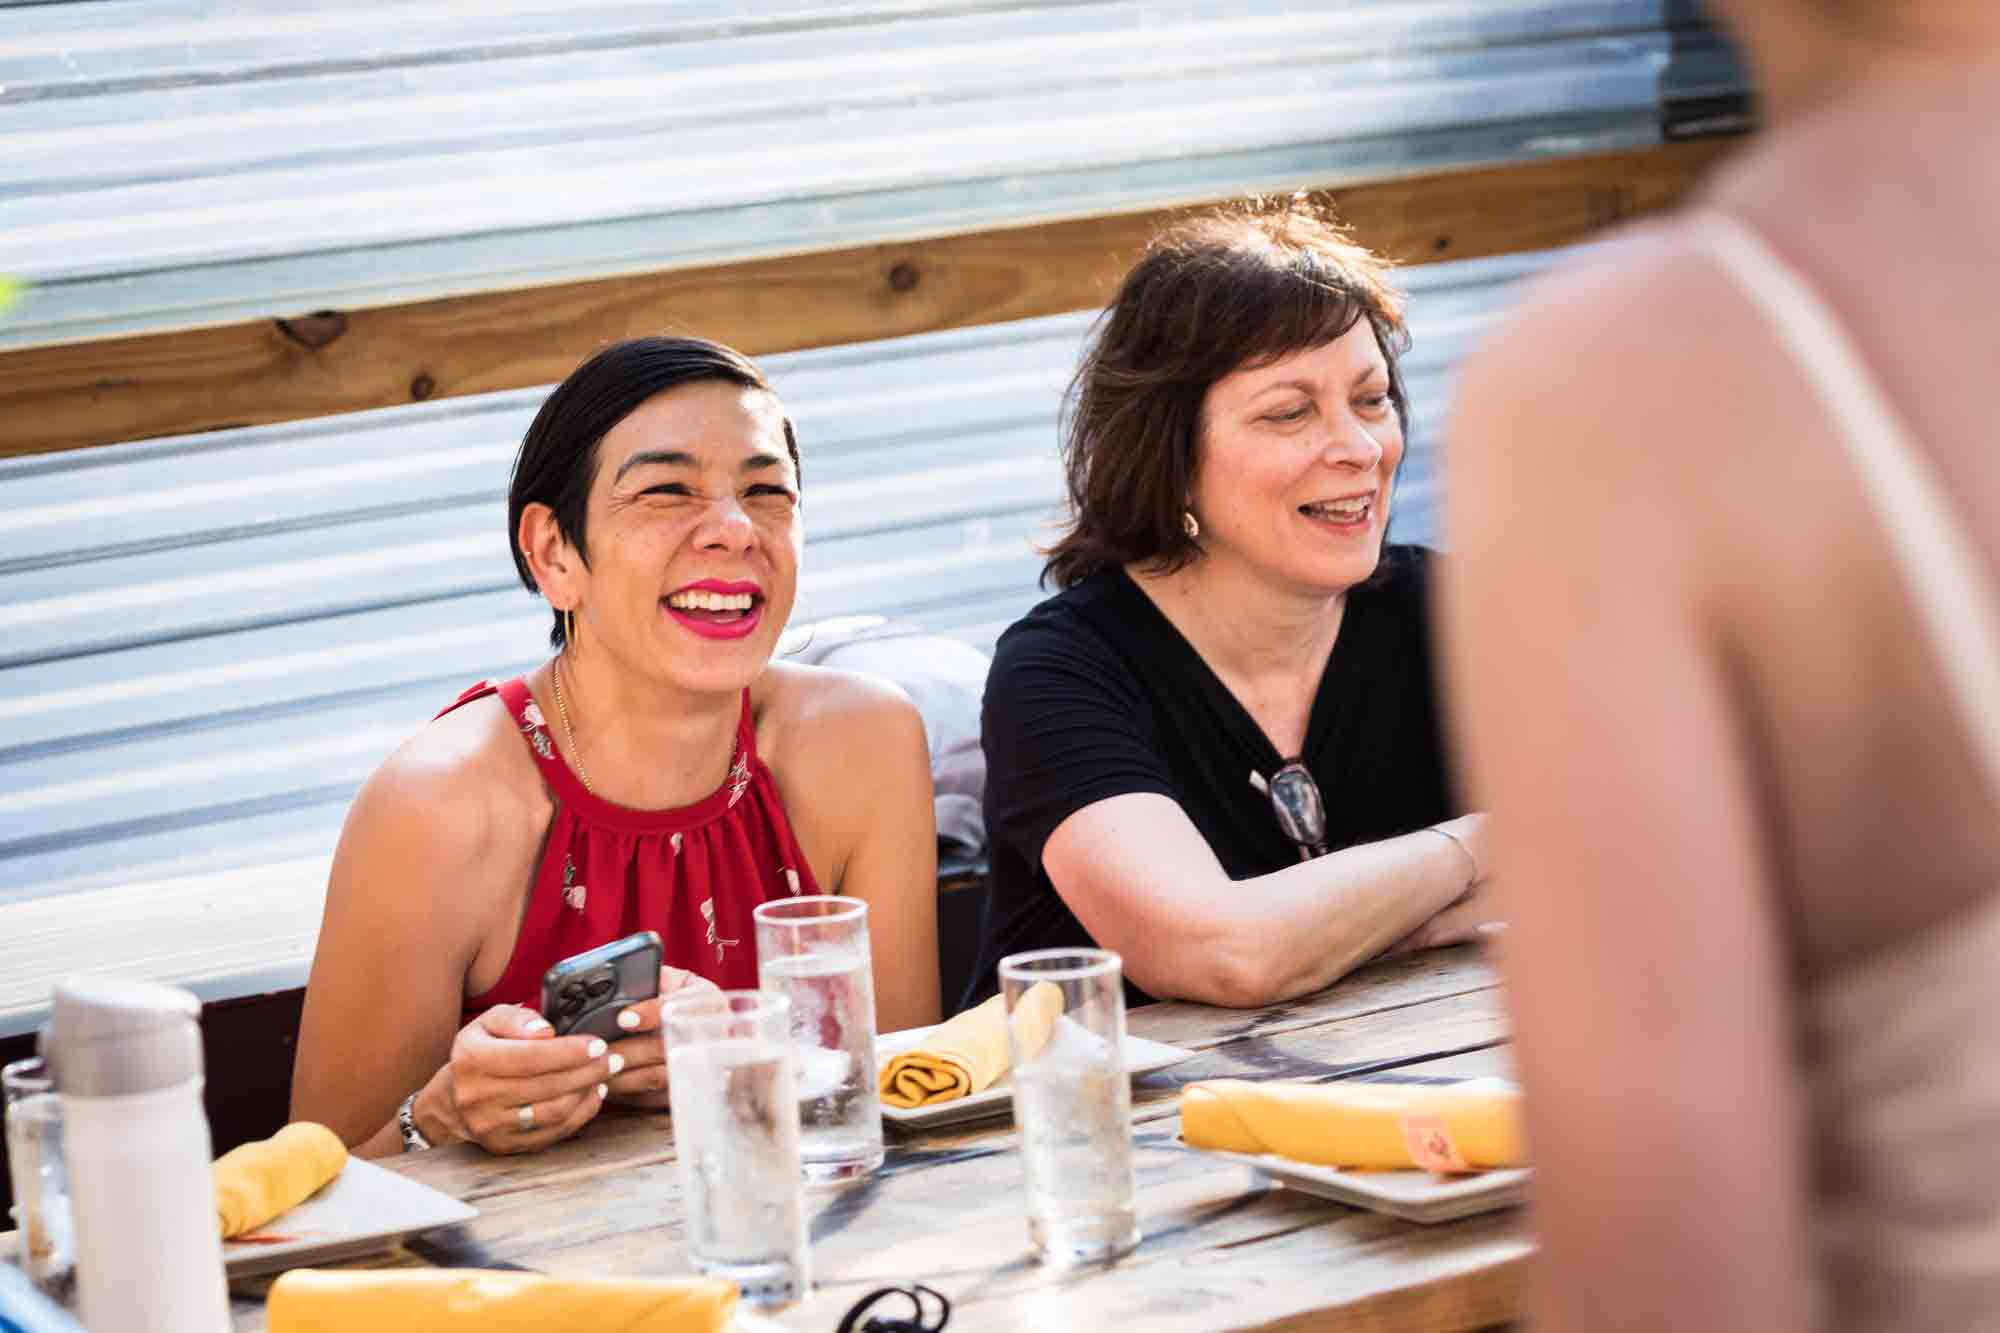 Two women smiling while seated during rehearsal dinner at an outdoor restaurant